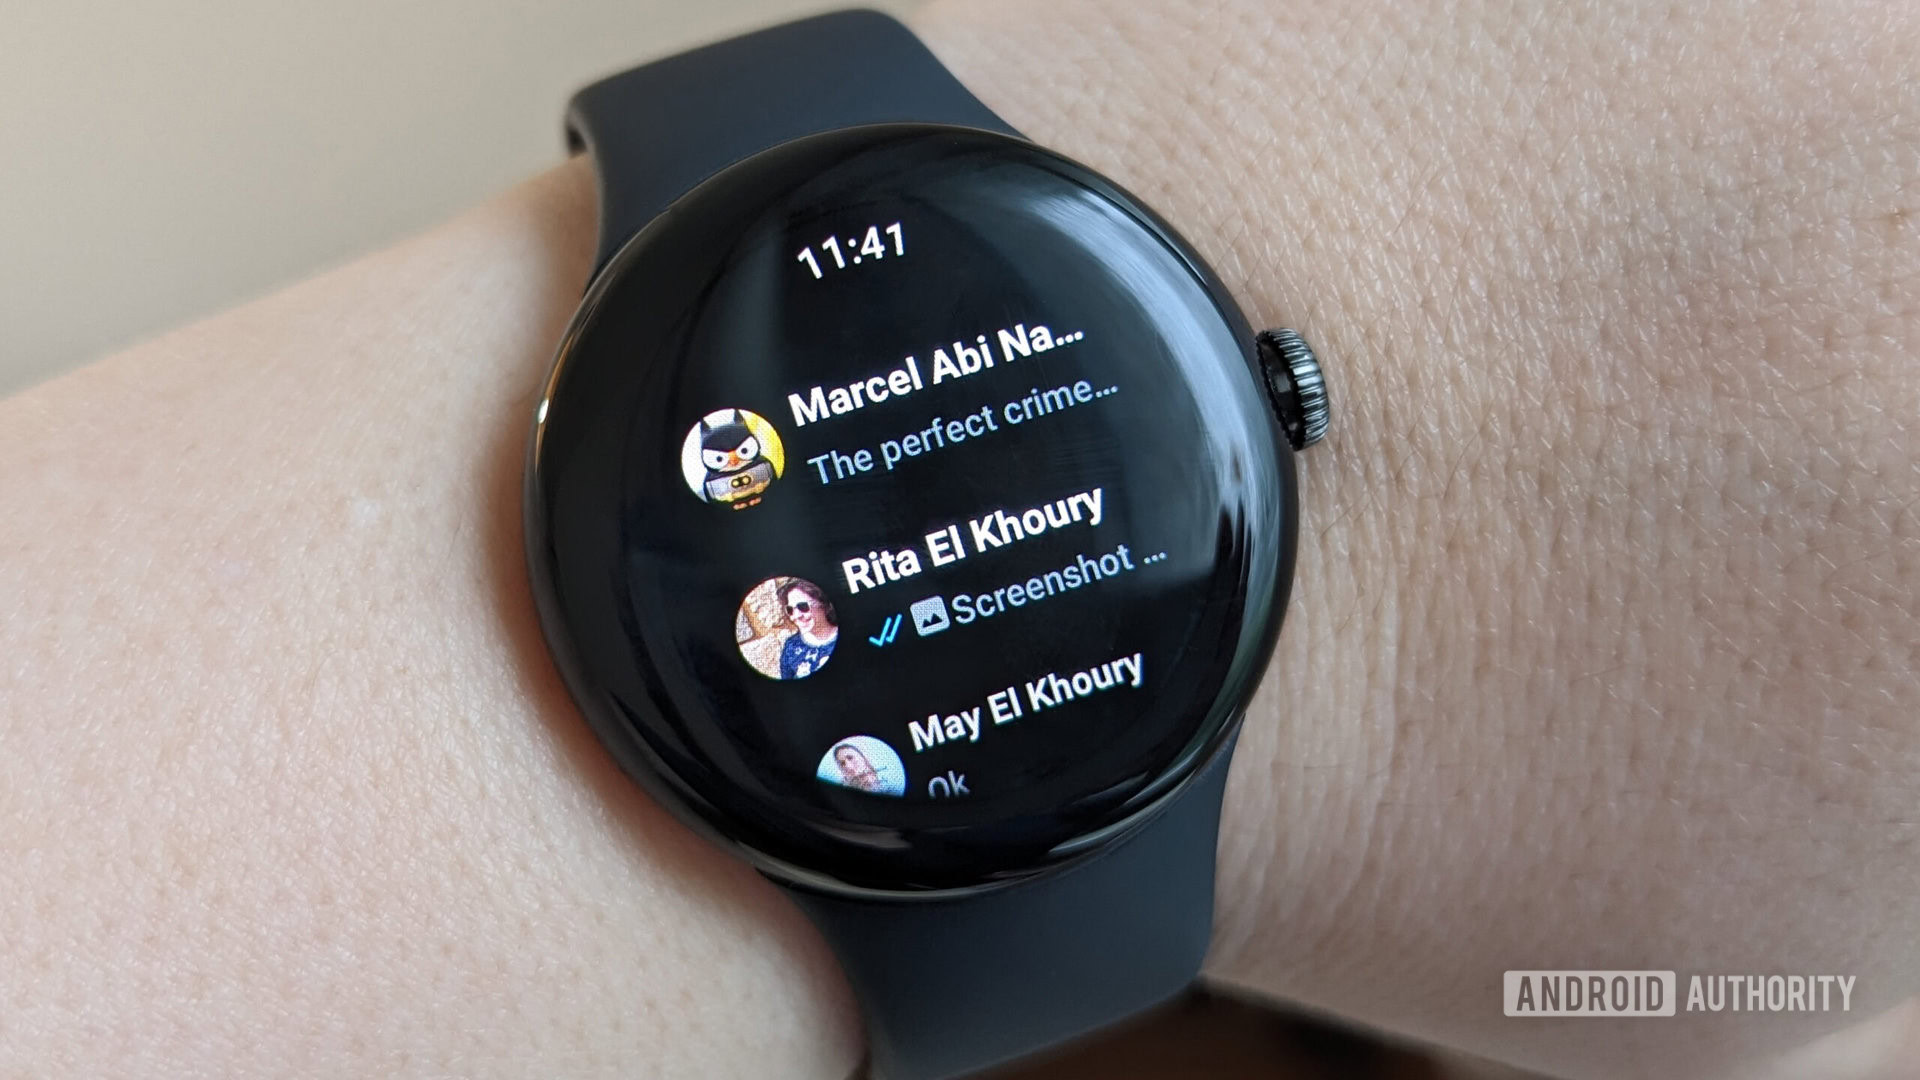 WhatsApp Wear OS app notifications not appearing or missing